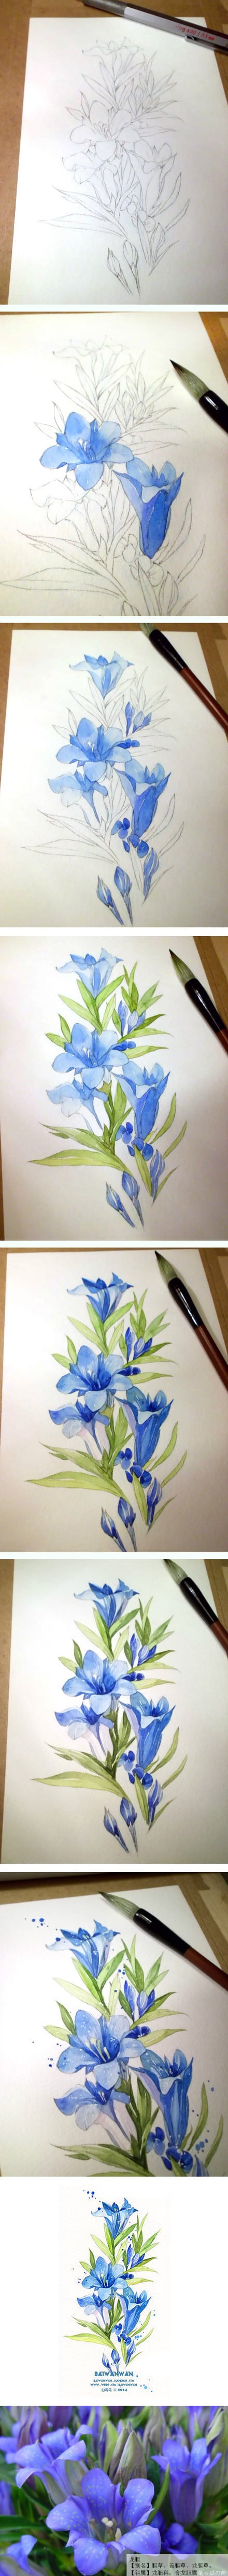 3. BLUE TONES REQUIRE DELICATE WHITE INSERTIONS TO SMOOTH DOWN FOLDS AND ADD LIGHT TO THE IMAGERY